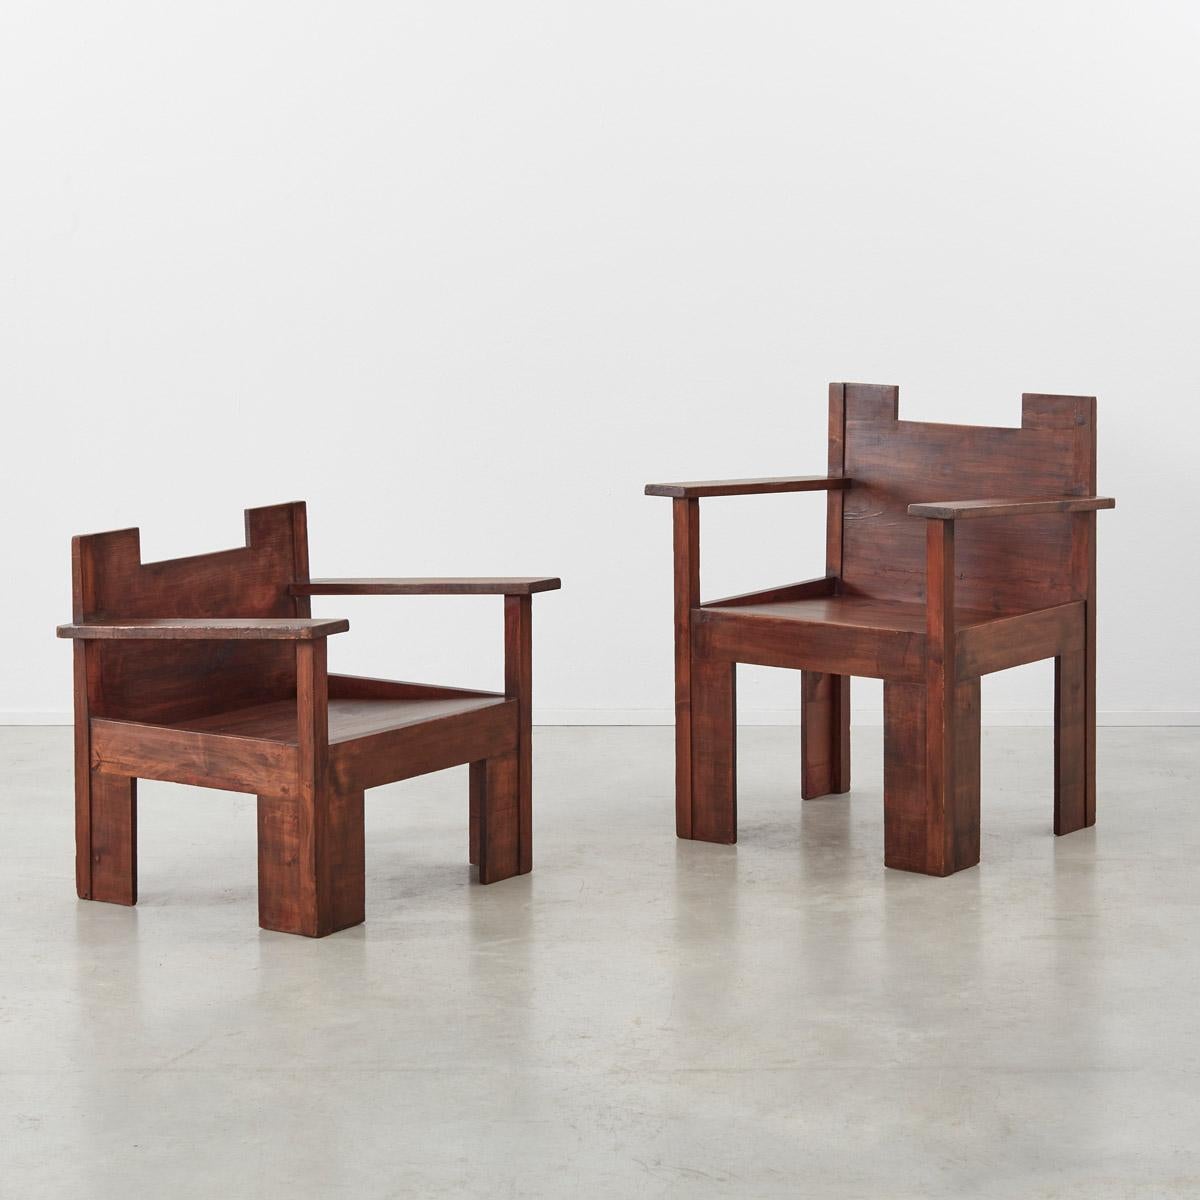 European His and Hers Brutalist Wooden Chairs, circa 1970s